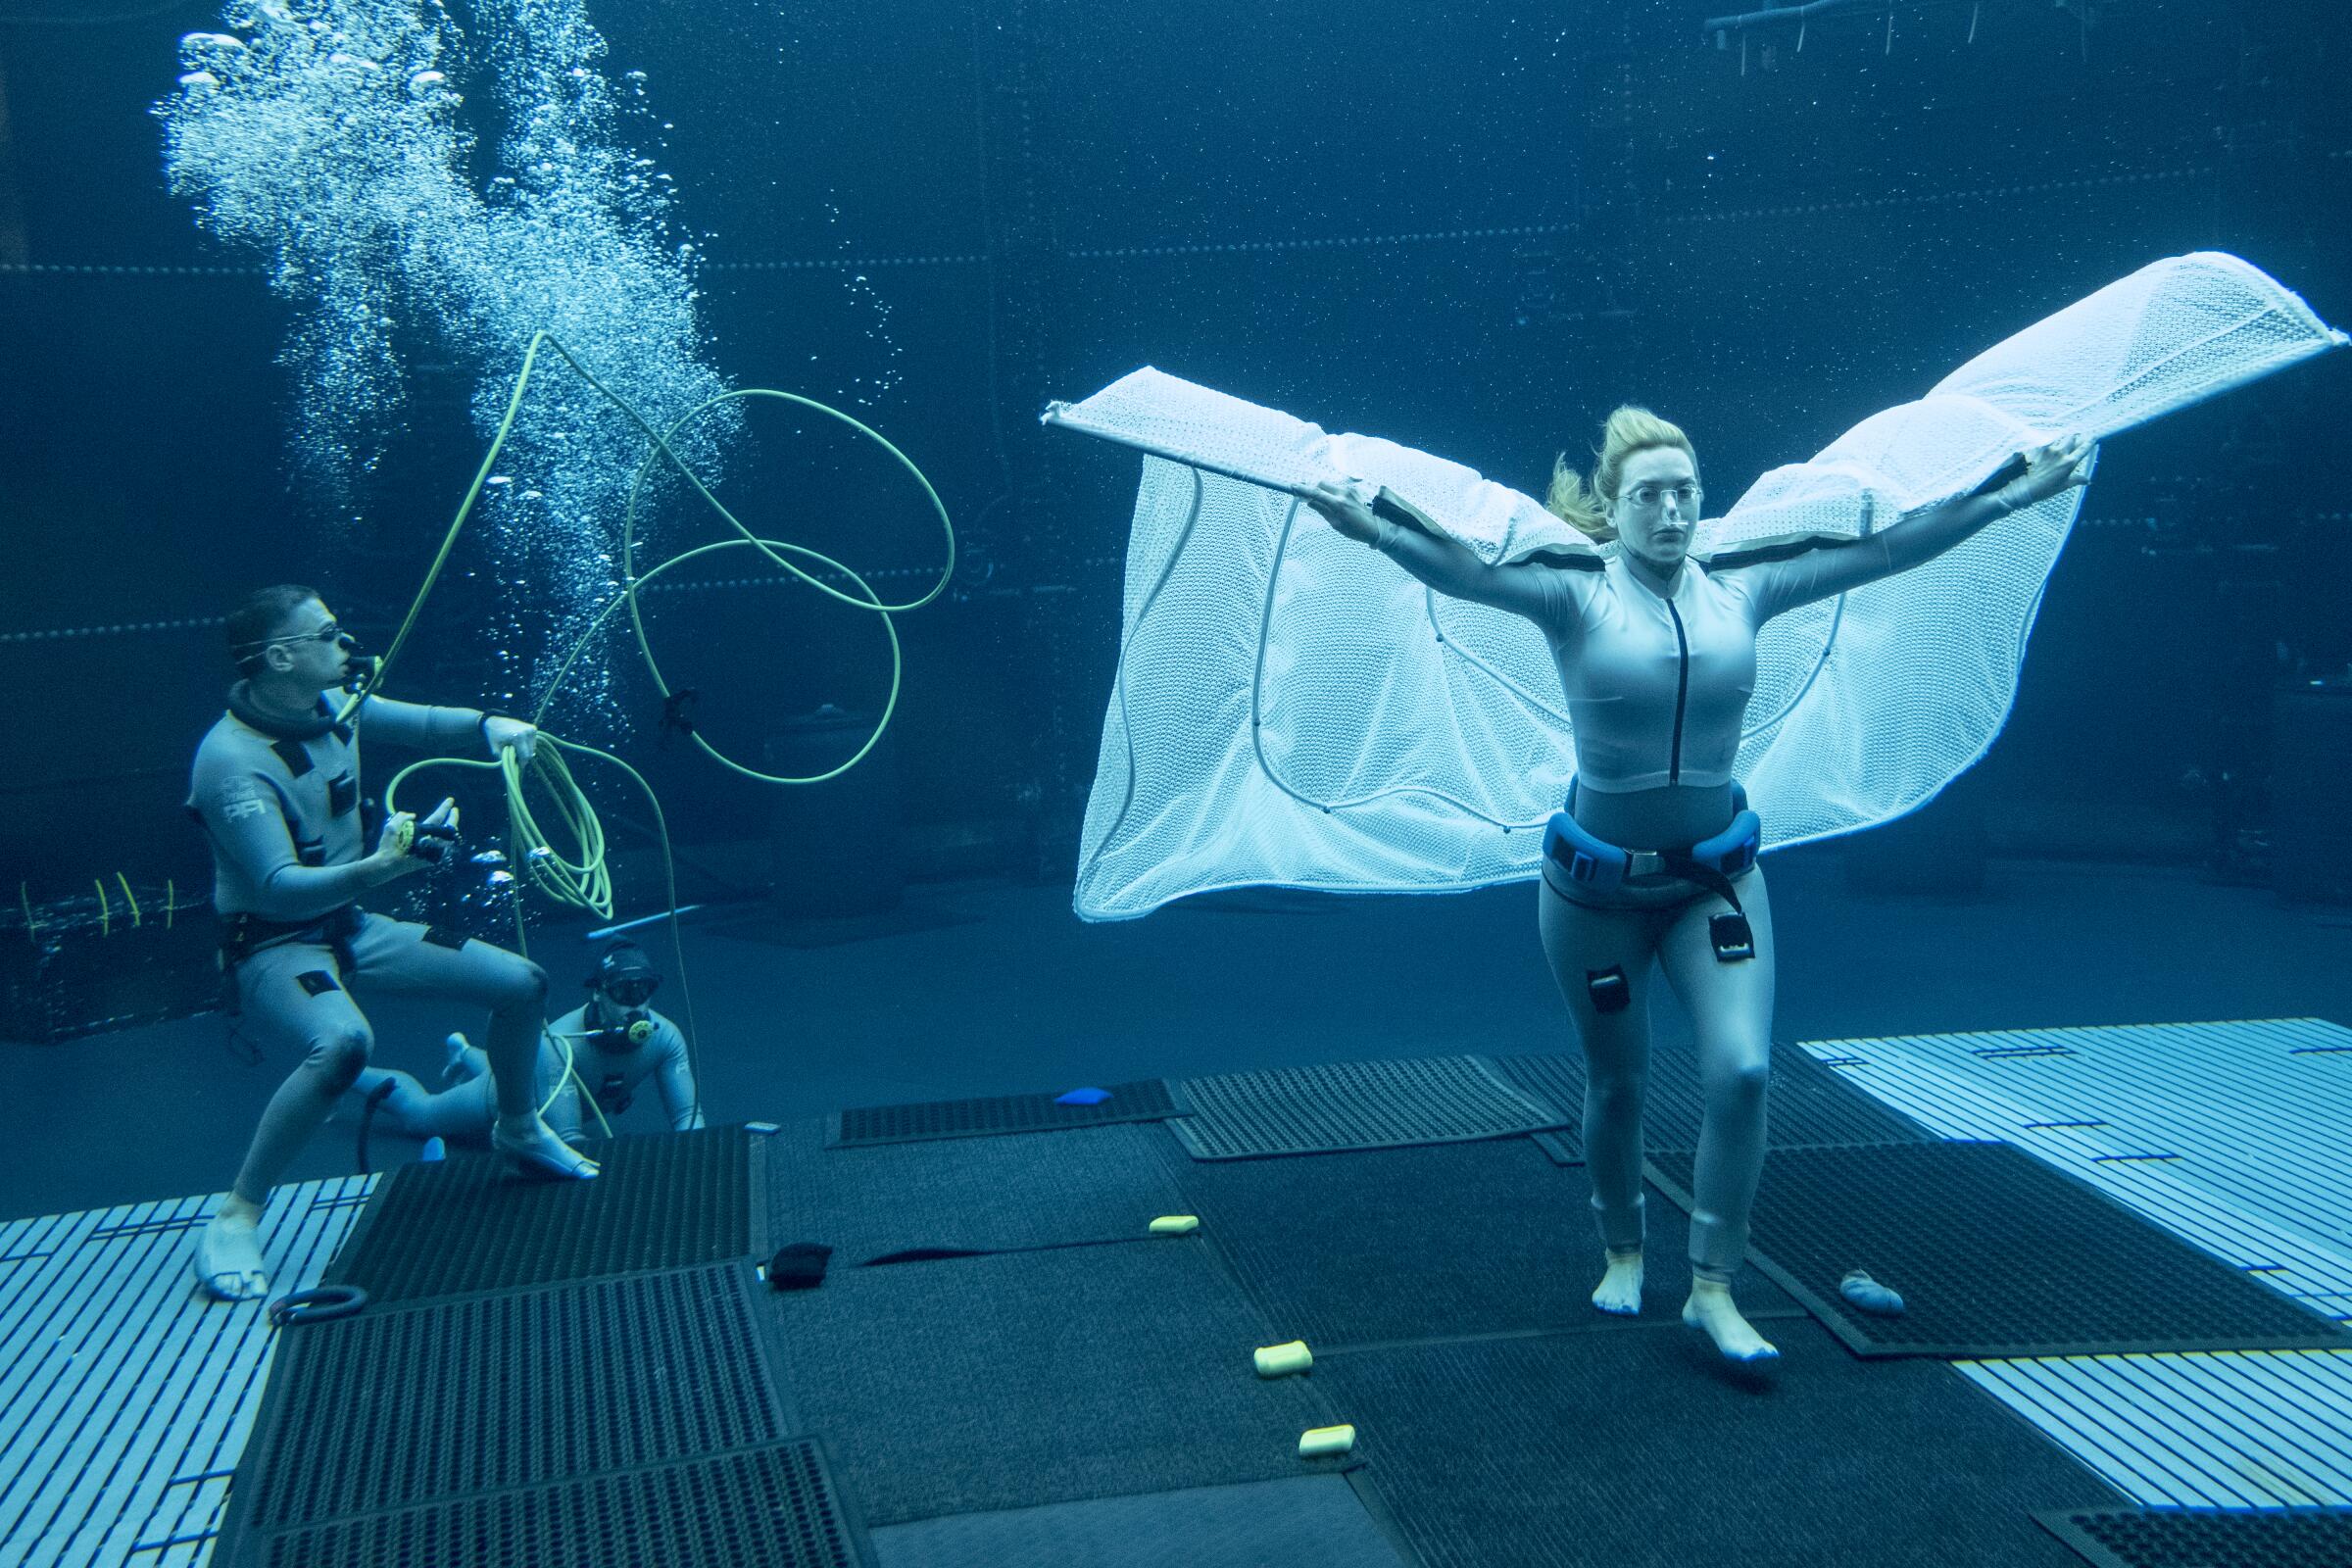 Kate Winslet is filmed walking underwater with a cape-like fabric stretched behind her.